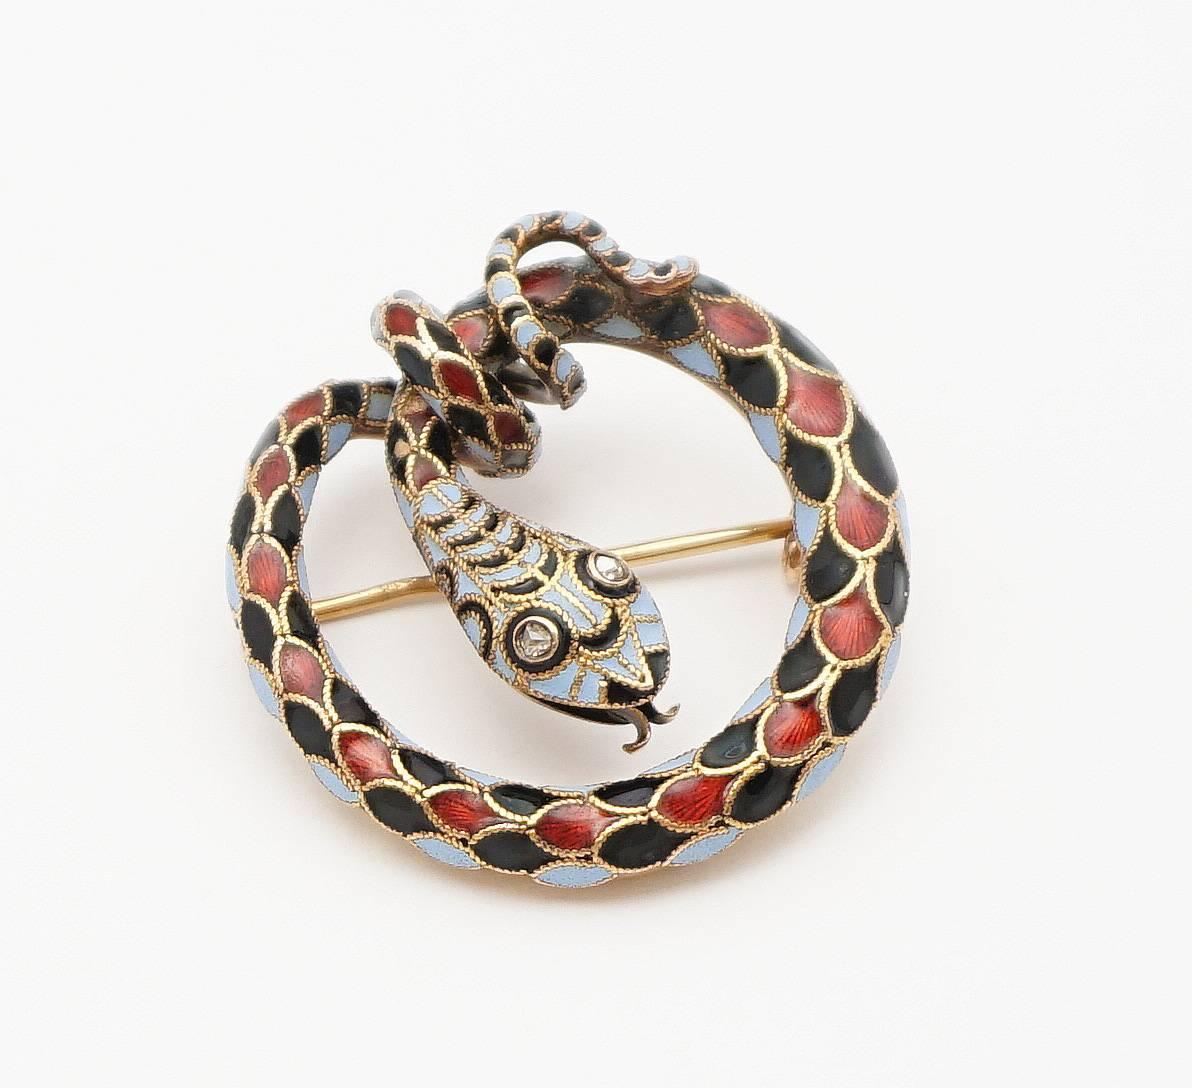 Beacon Hill Jewelers Presents:

A very dramatic, victorian era enameled Snake form brooch in 18 karat yellow gold. Displaying the body of an encircled snake set with diamond eyes, this snake boasts beautiful richly colored red, blue, and black